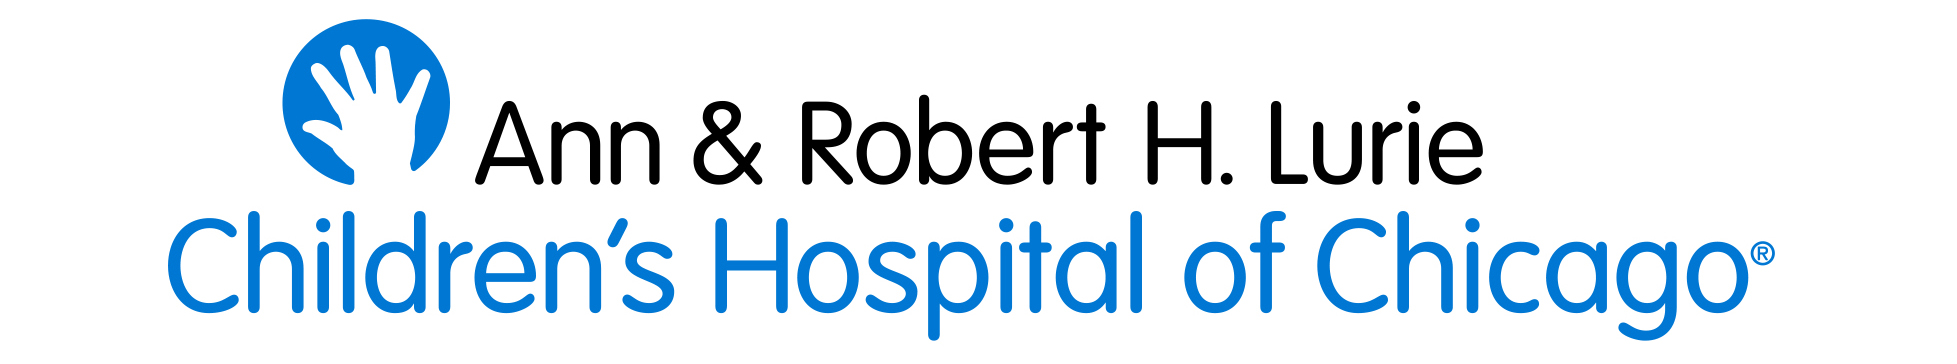 ANN AND ROBERT H LURIE CHILDREN’S HOSPITAL OF CHICAGO